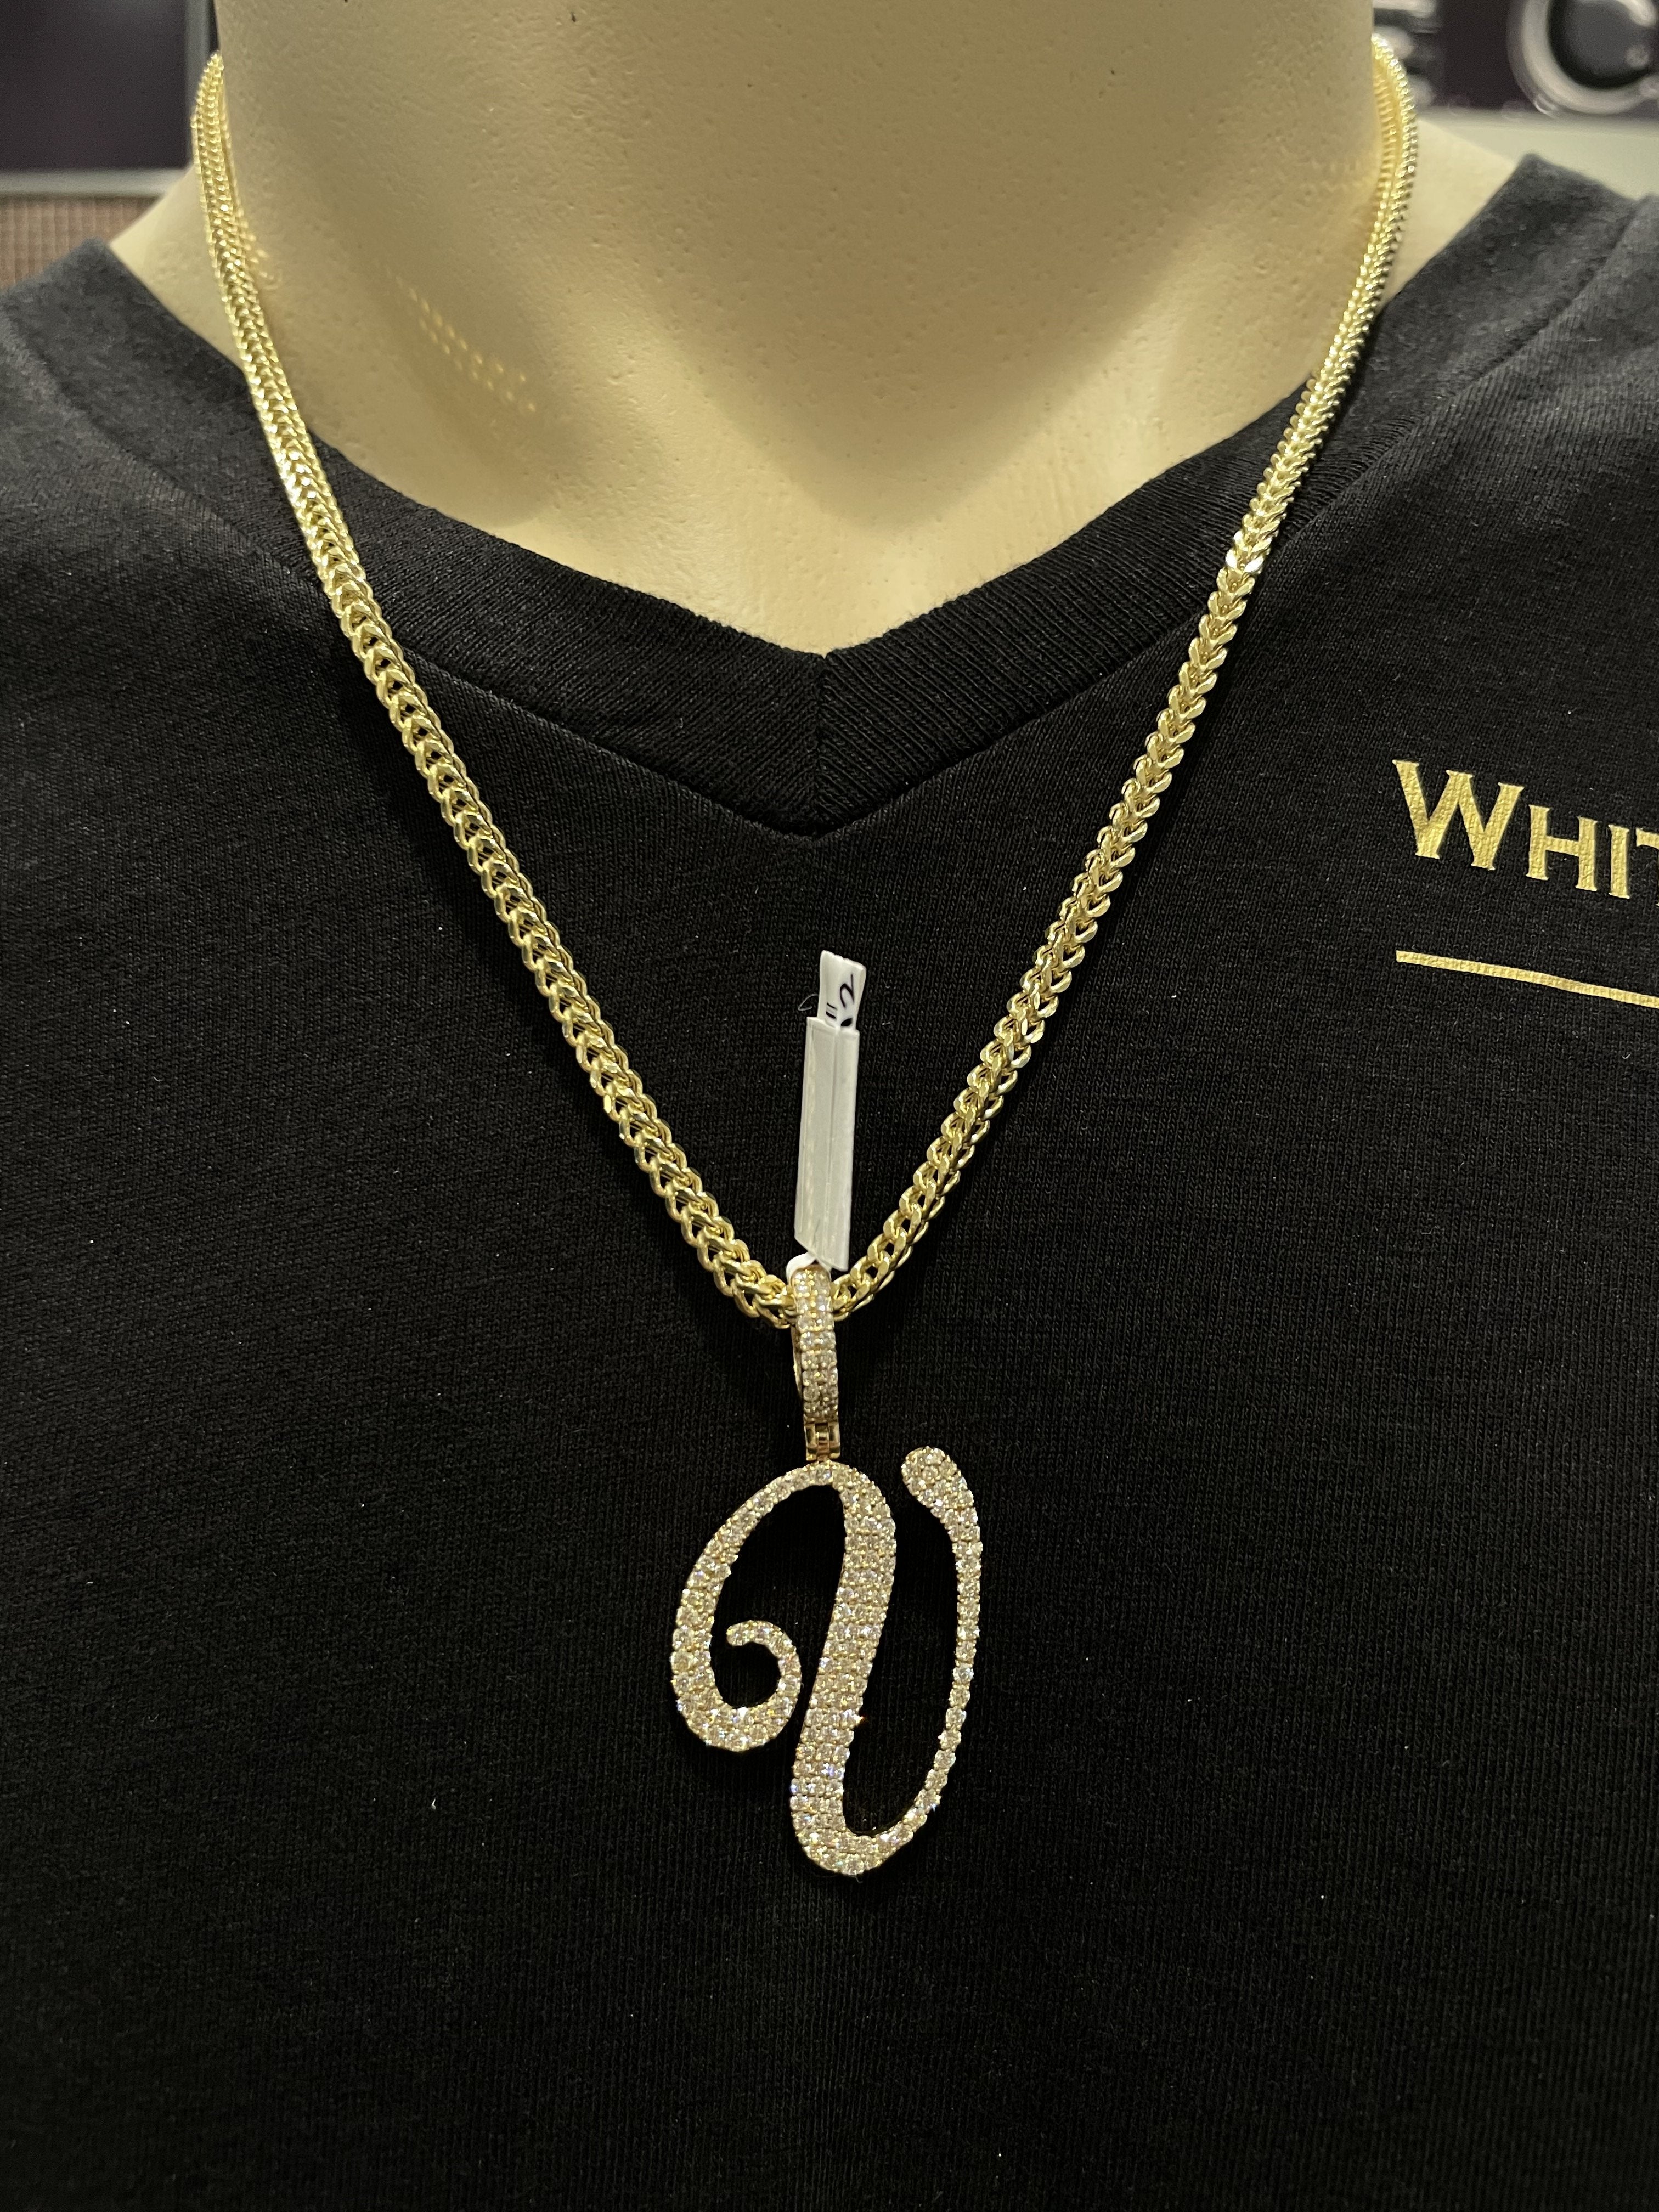 2.50 CT. Diamond Initial "V" Pendant in Gold With Chain - White Carat - USA & Canada